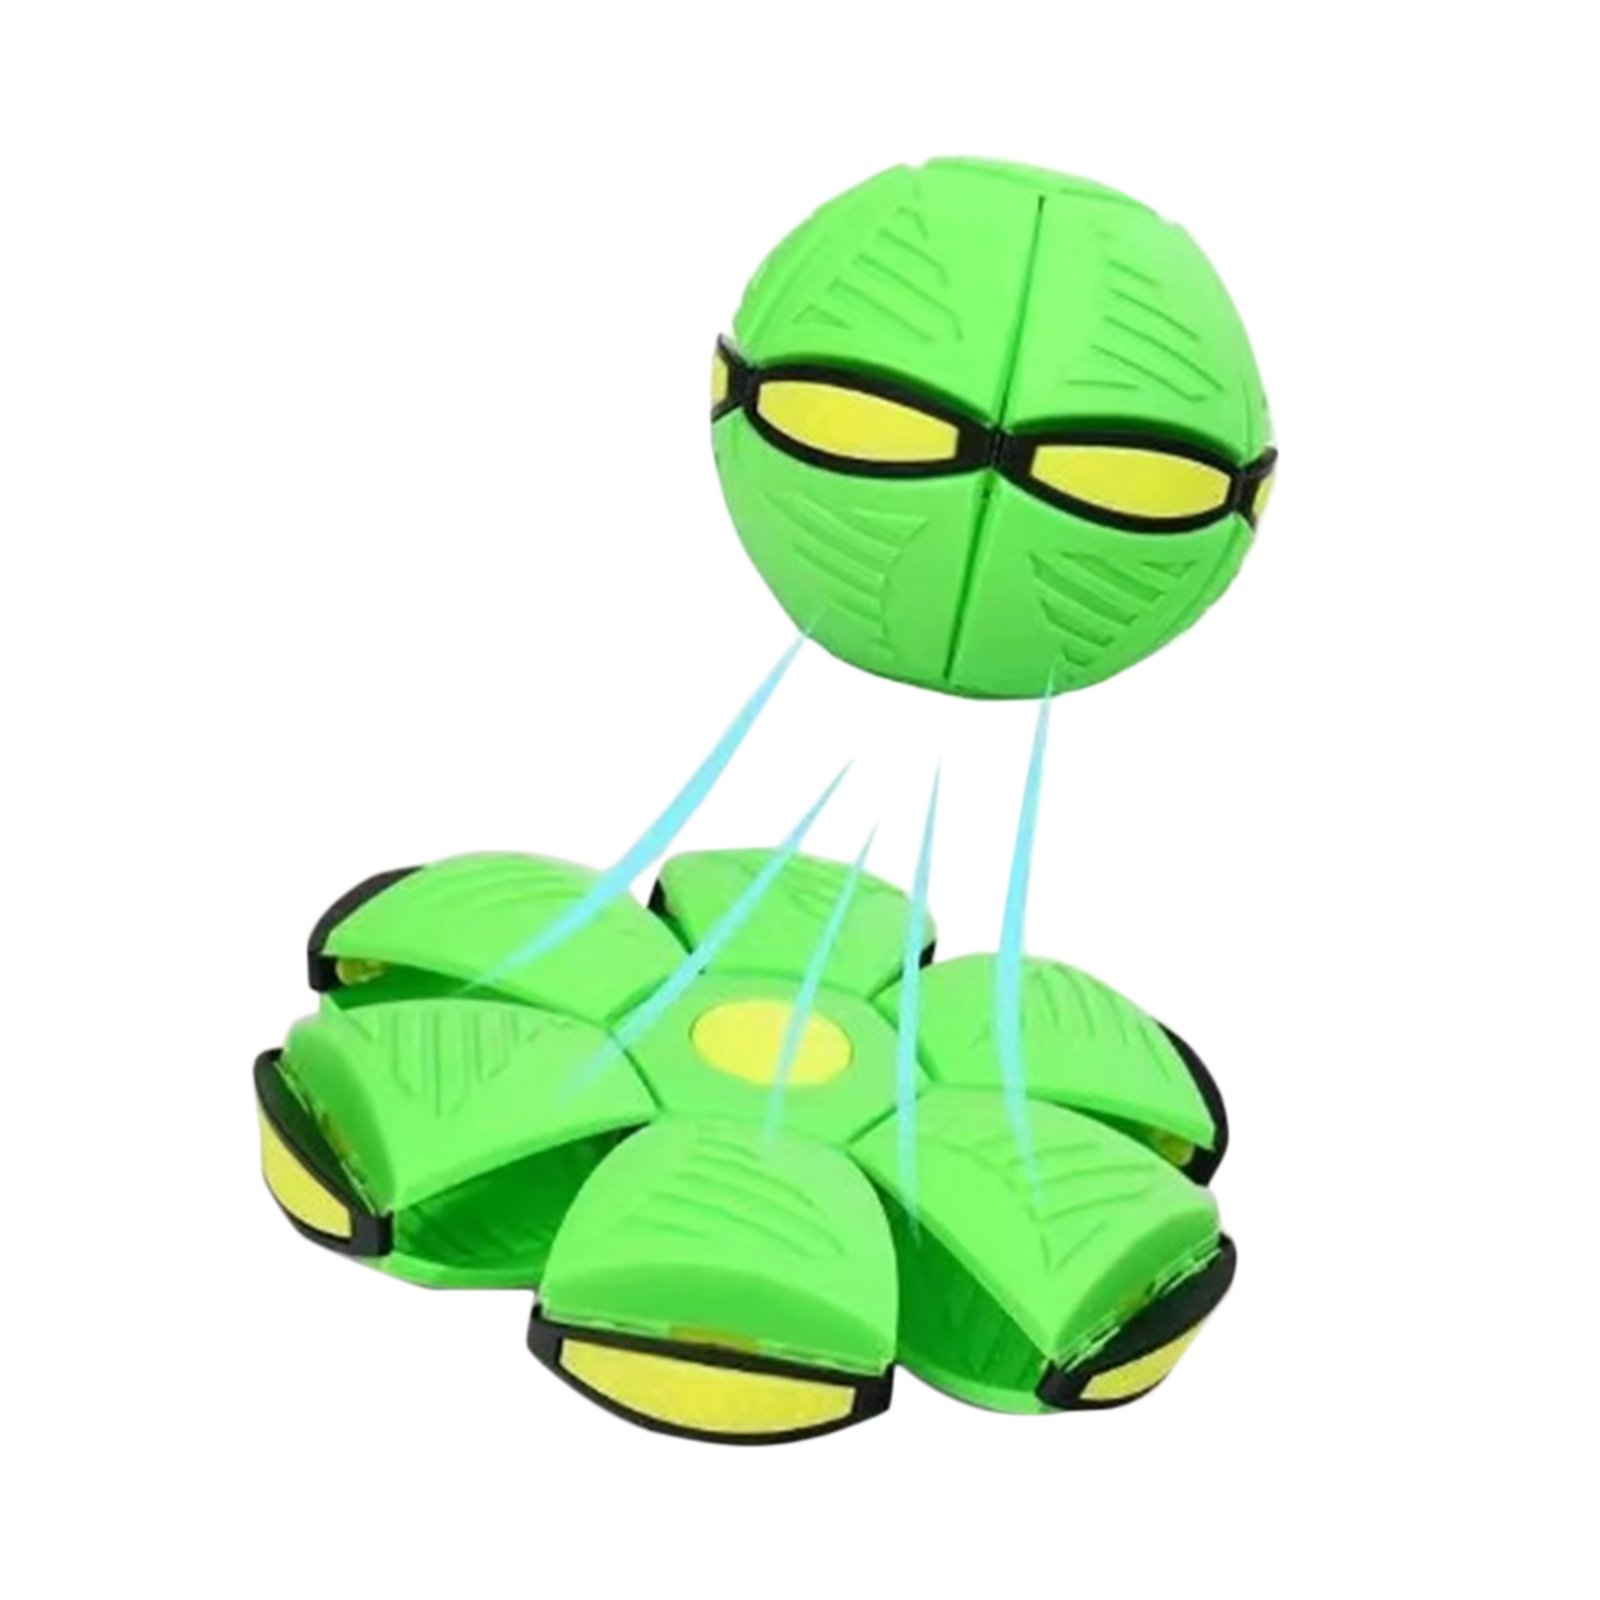 Flying Saucer Ball Magic Deformation UFO With Led Light Flying Toys Decompression Children Outdoor Fun Toys For Kids Gift